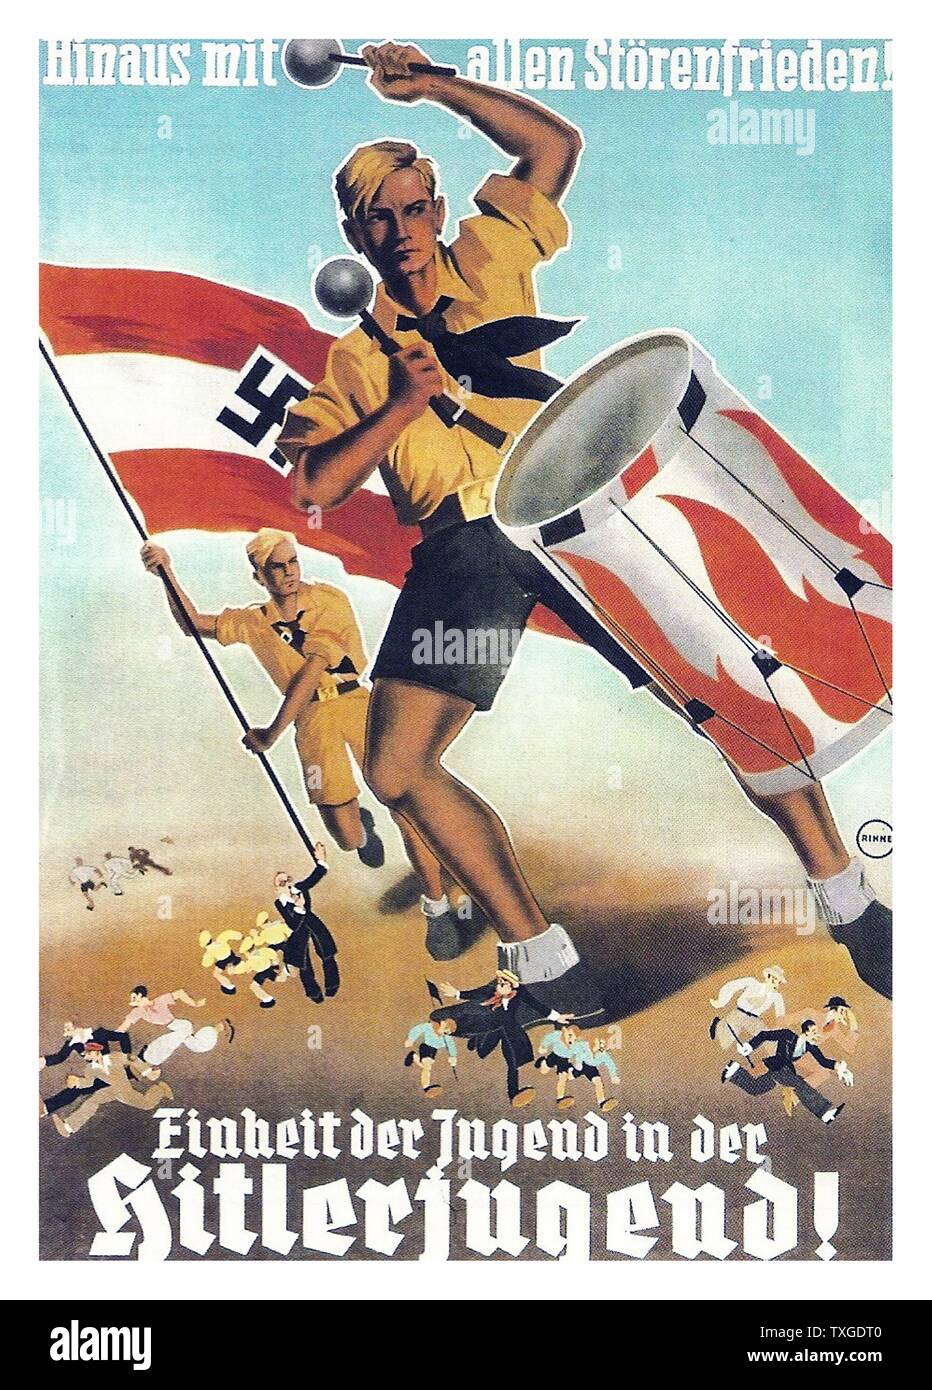 colour-hitler-youth-poster-from-the-second-world-war-dated-1936-TXGDT0.jpg